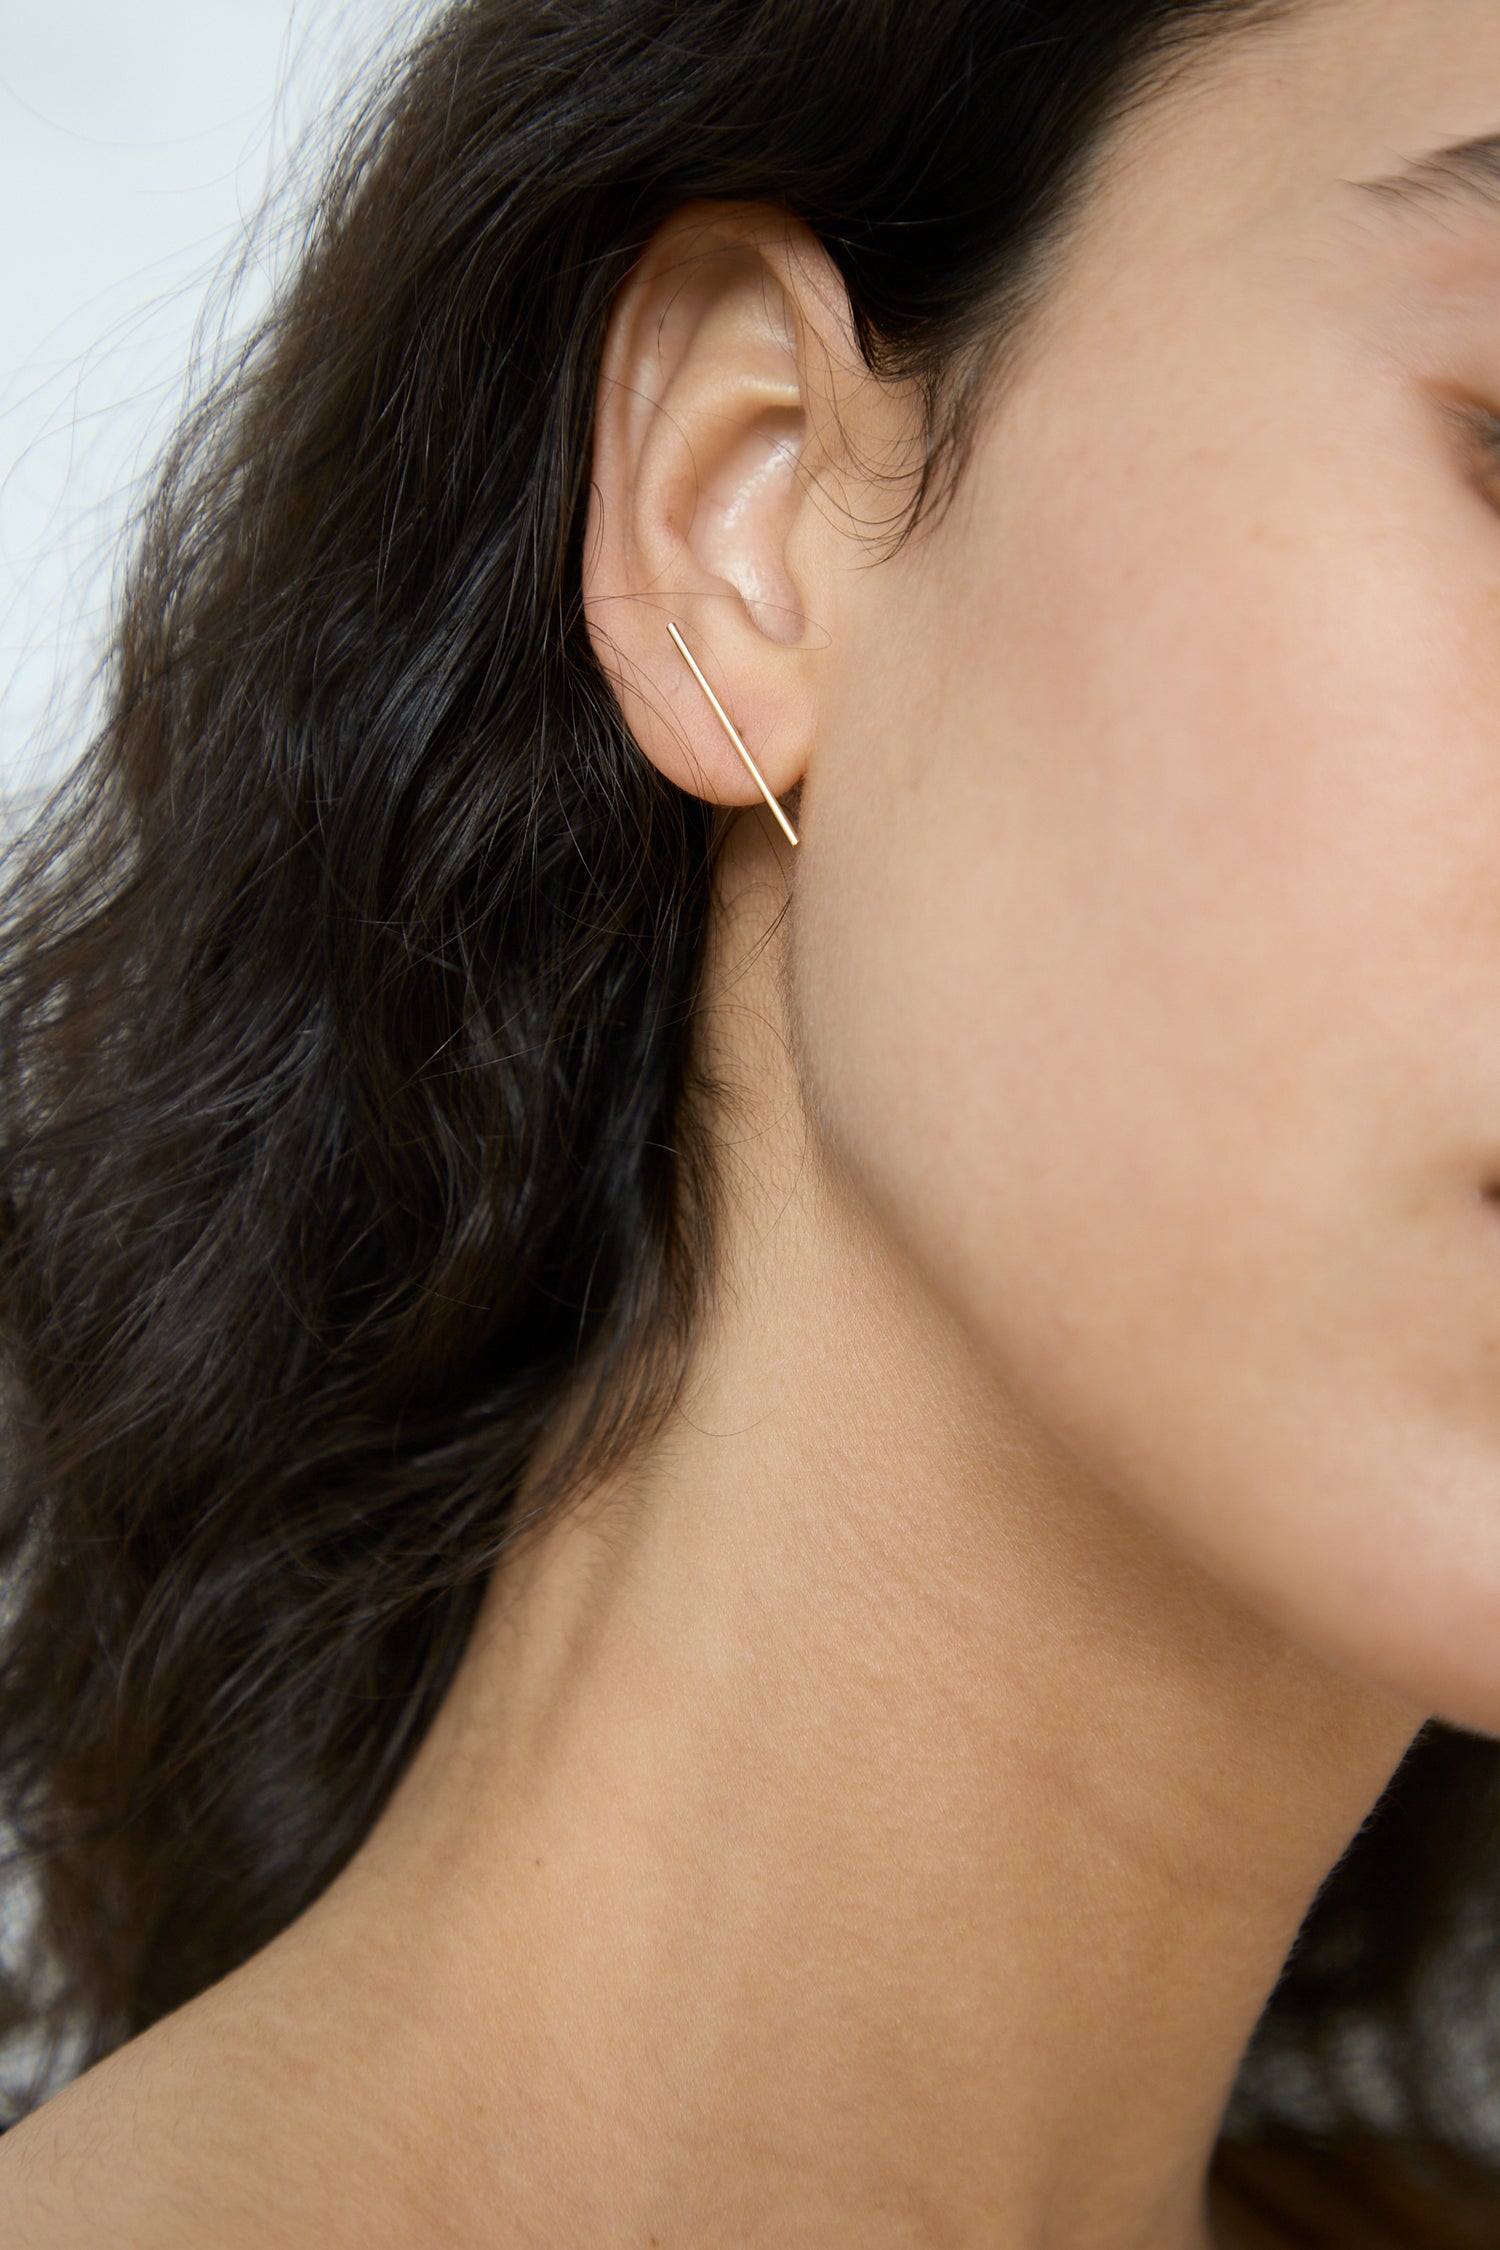 A close up of a woman's ear with Kathleen Whitaker Stick Stud 1" Single Earring in 14K Yellow Gold earrings.